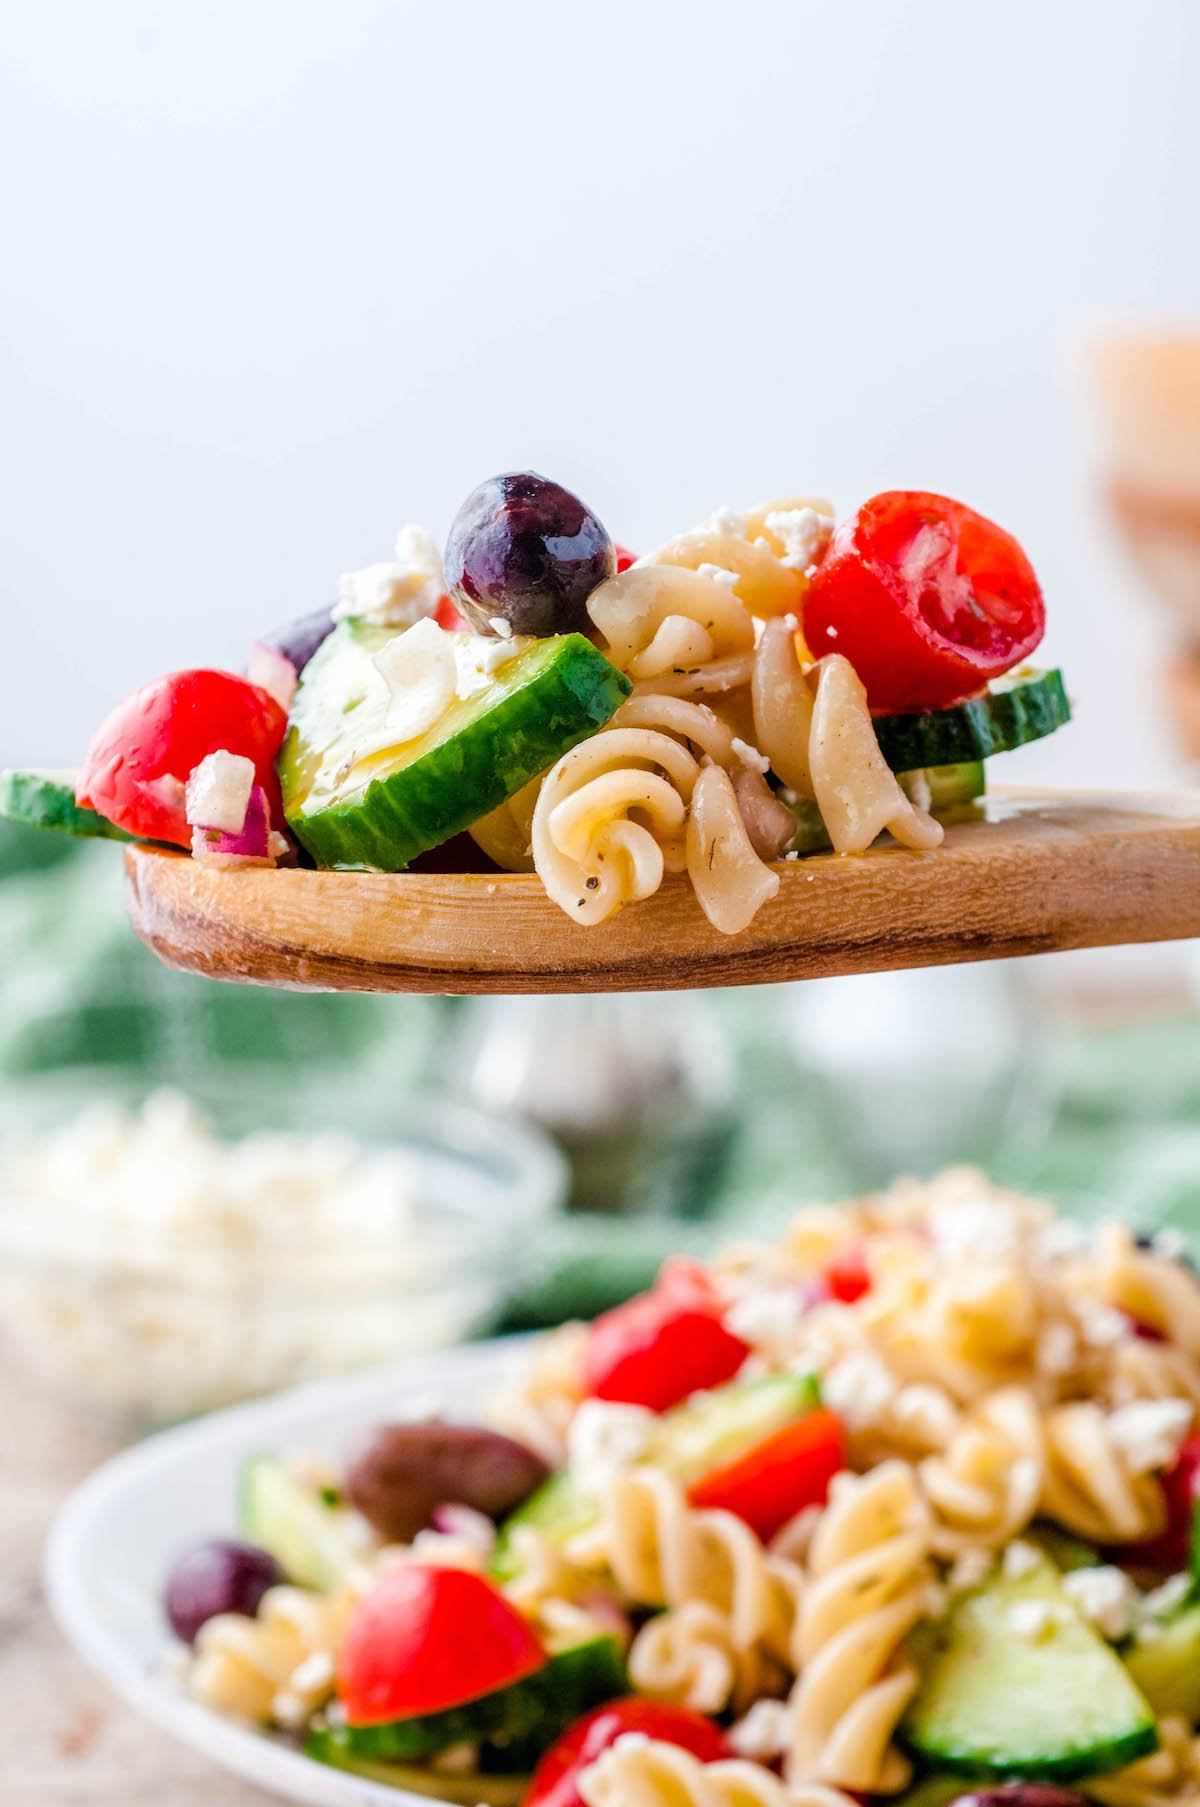 A wooden spoon scooping up a serving of greek pasta salad from a bowl.